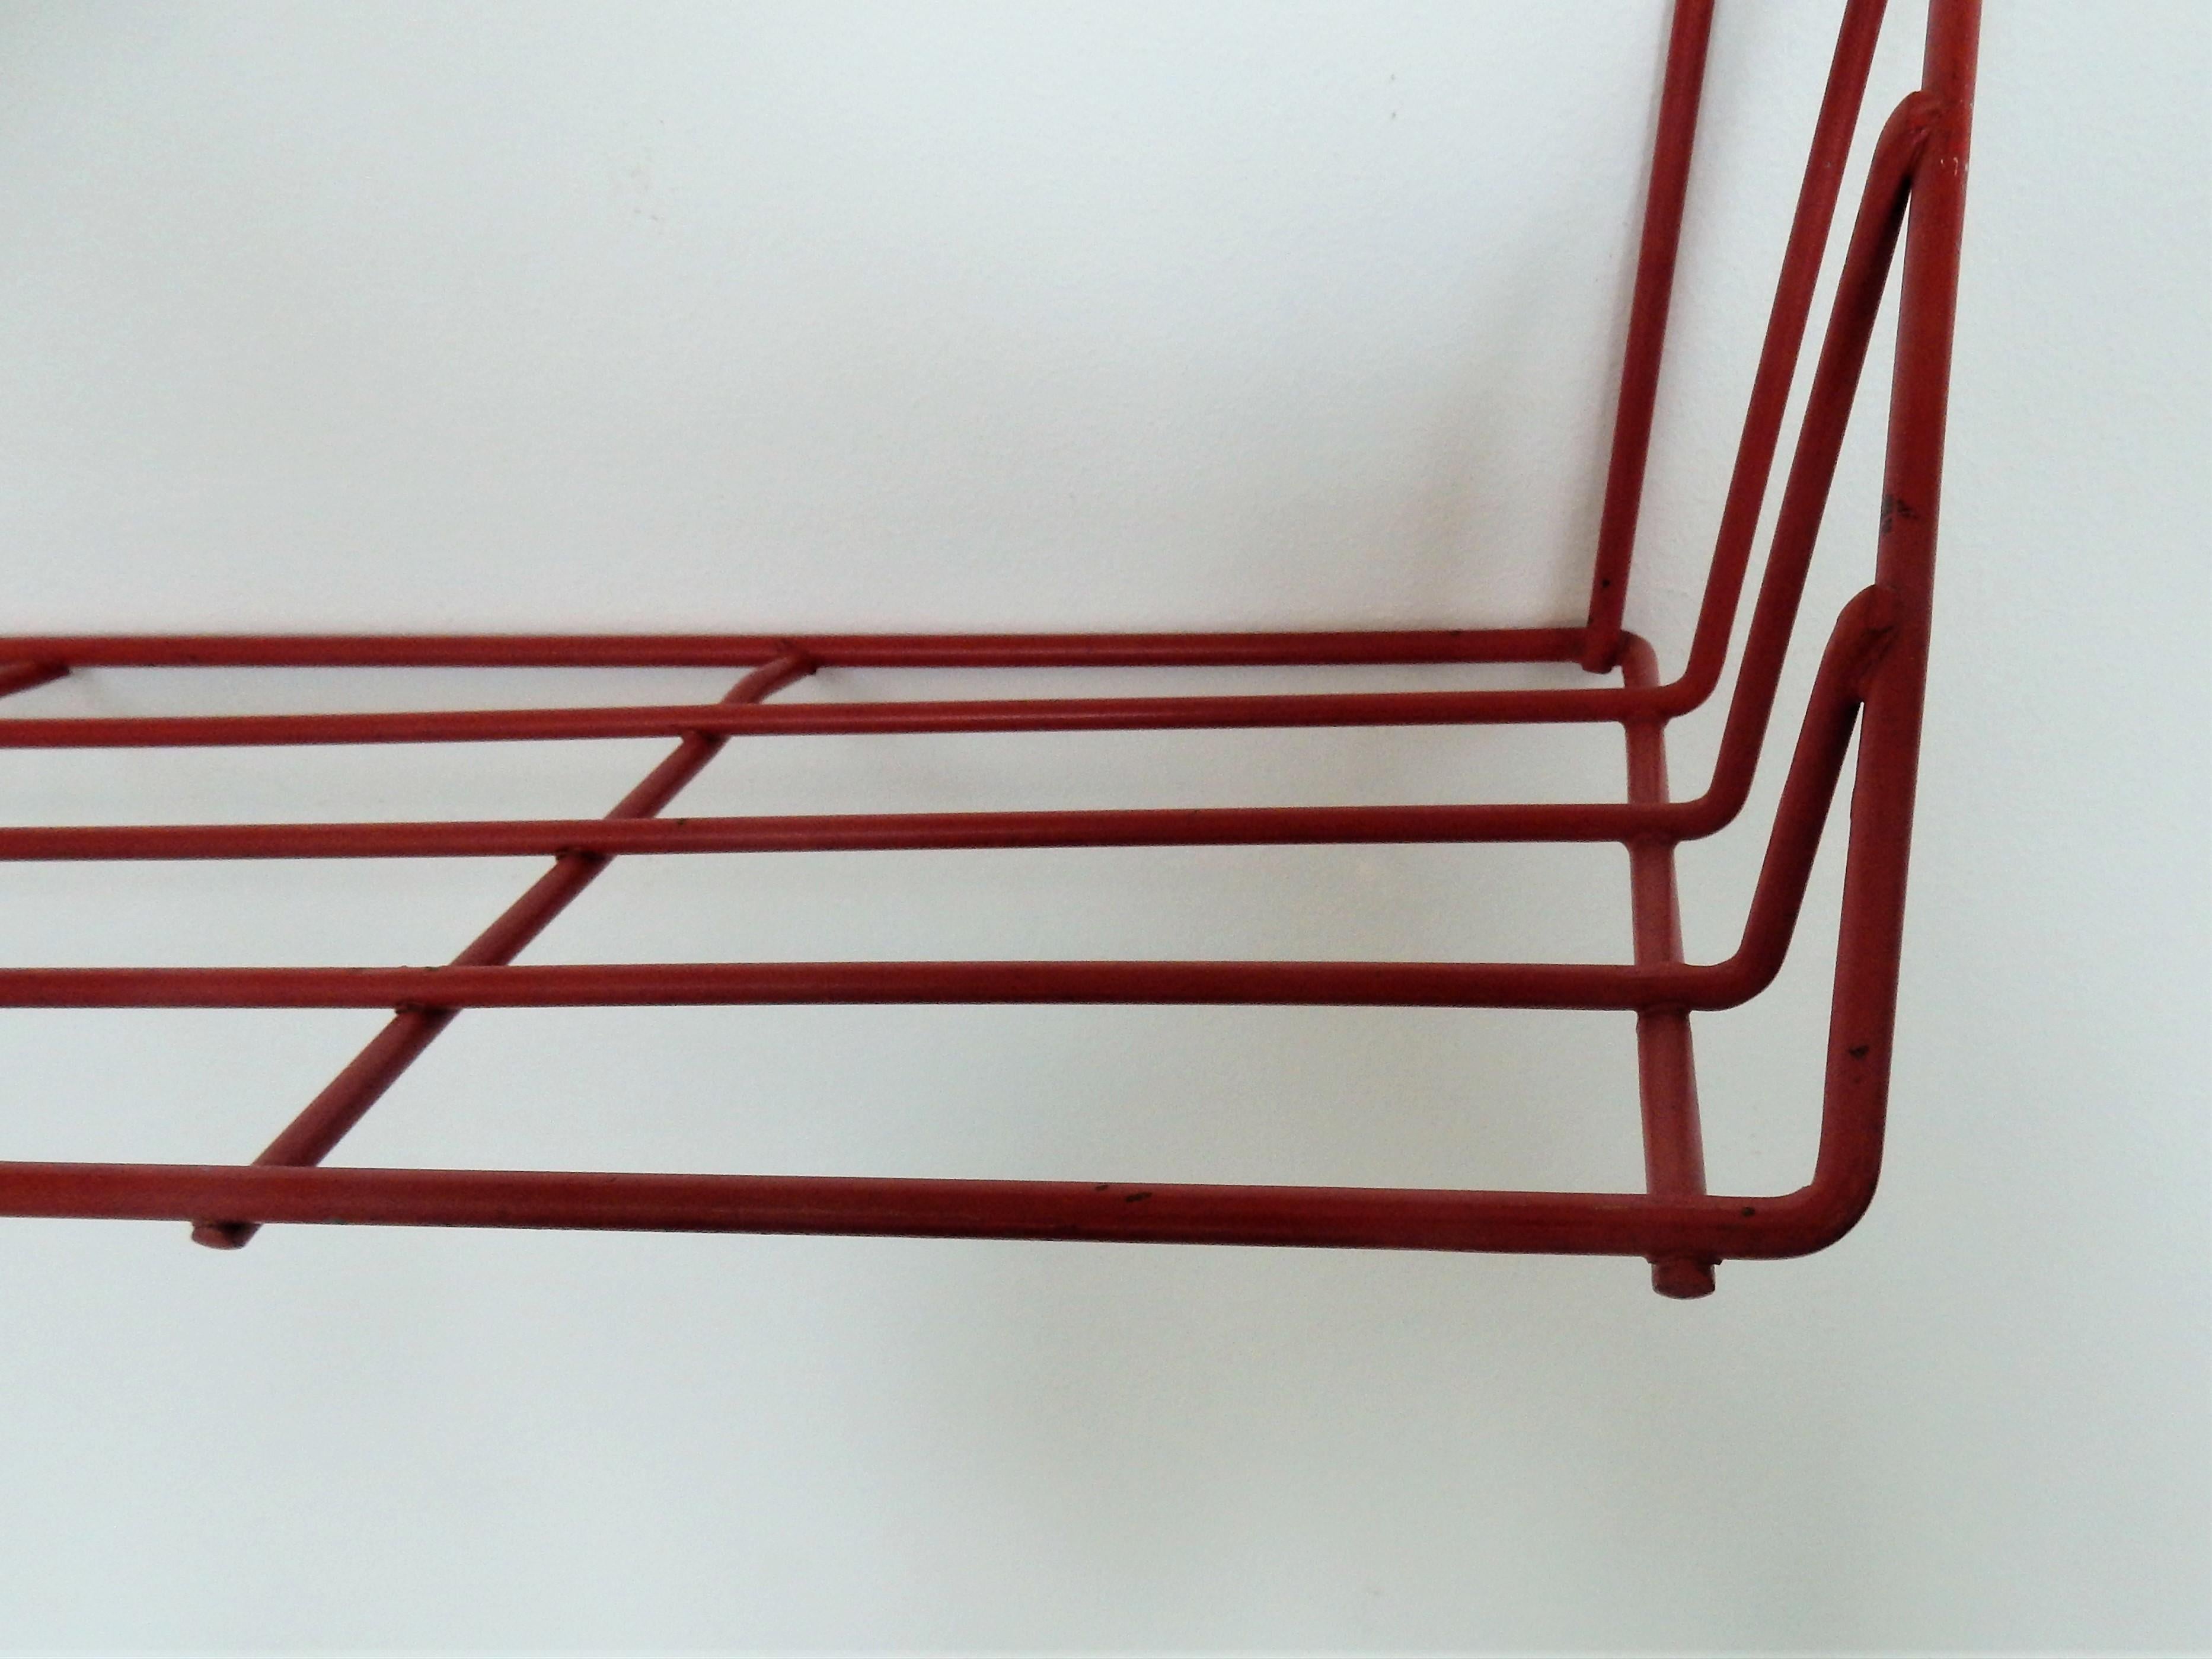 Dutch Highly Rare Red 'Delft' Shelf by Constant Nieuwenhuys for 't Spectrum, 1956